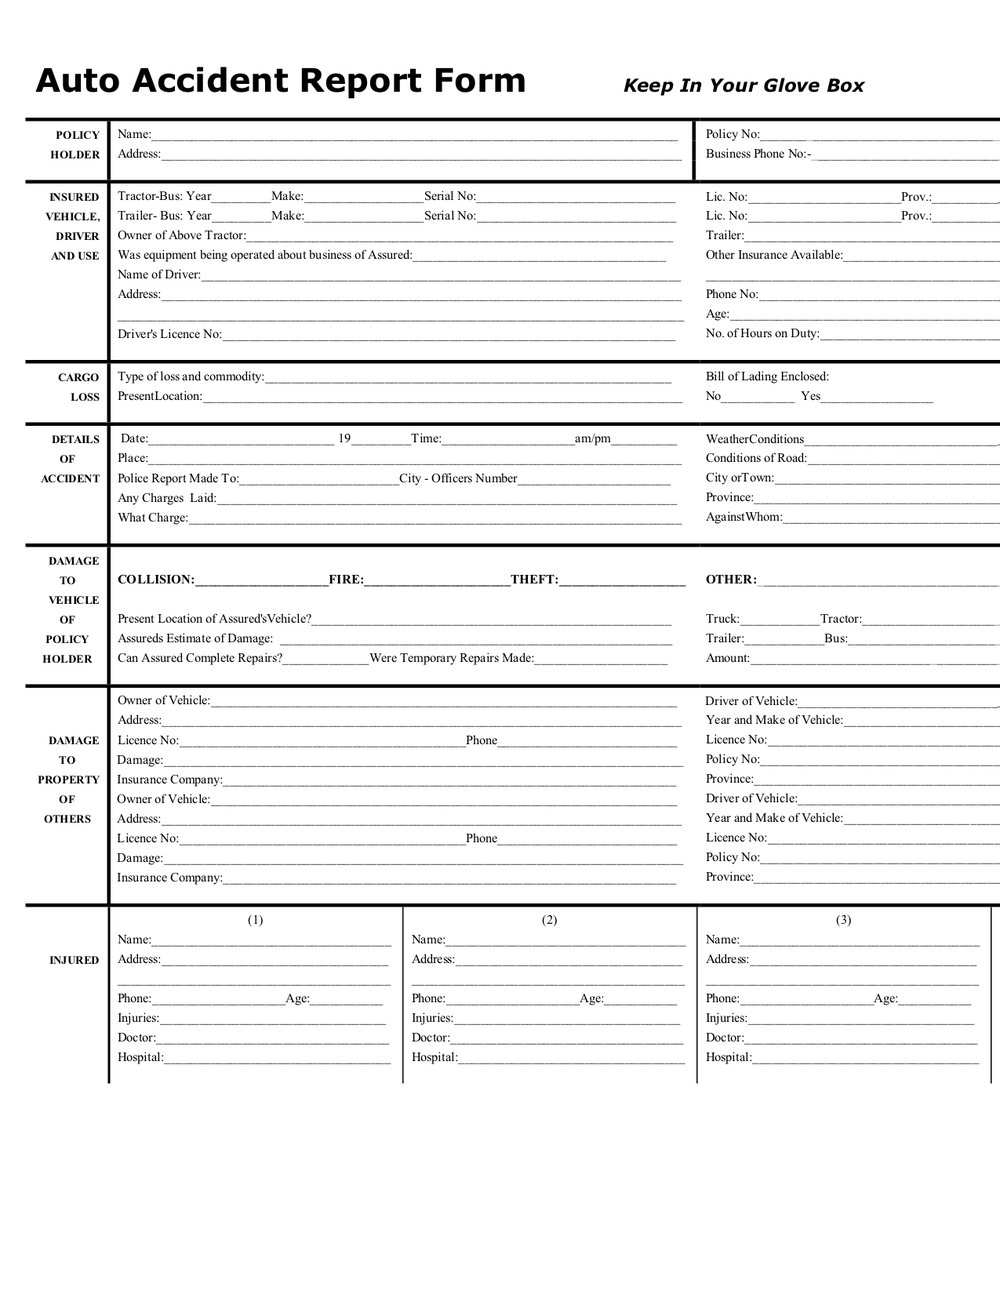 Auto Accident Report Form — Great Frontier Insurance Throughout Vehicle Accident Report Template